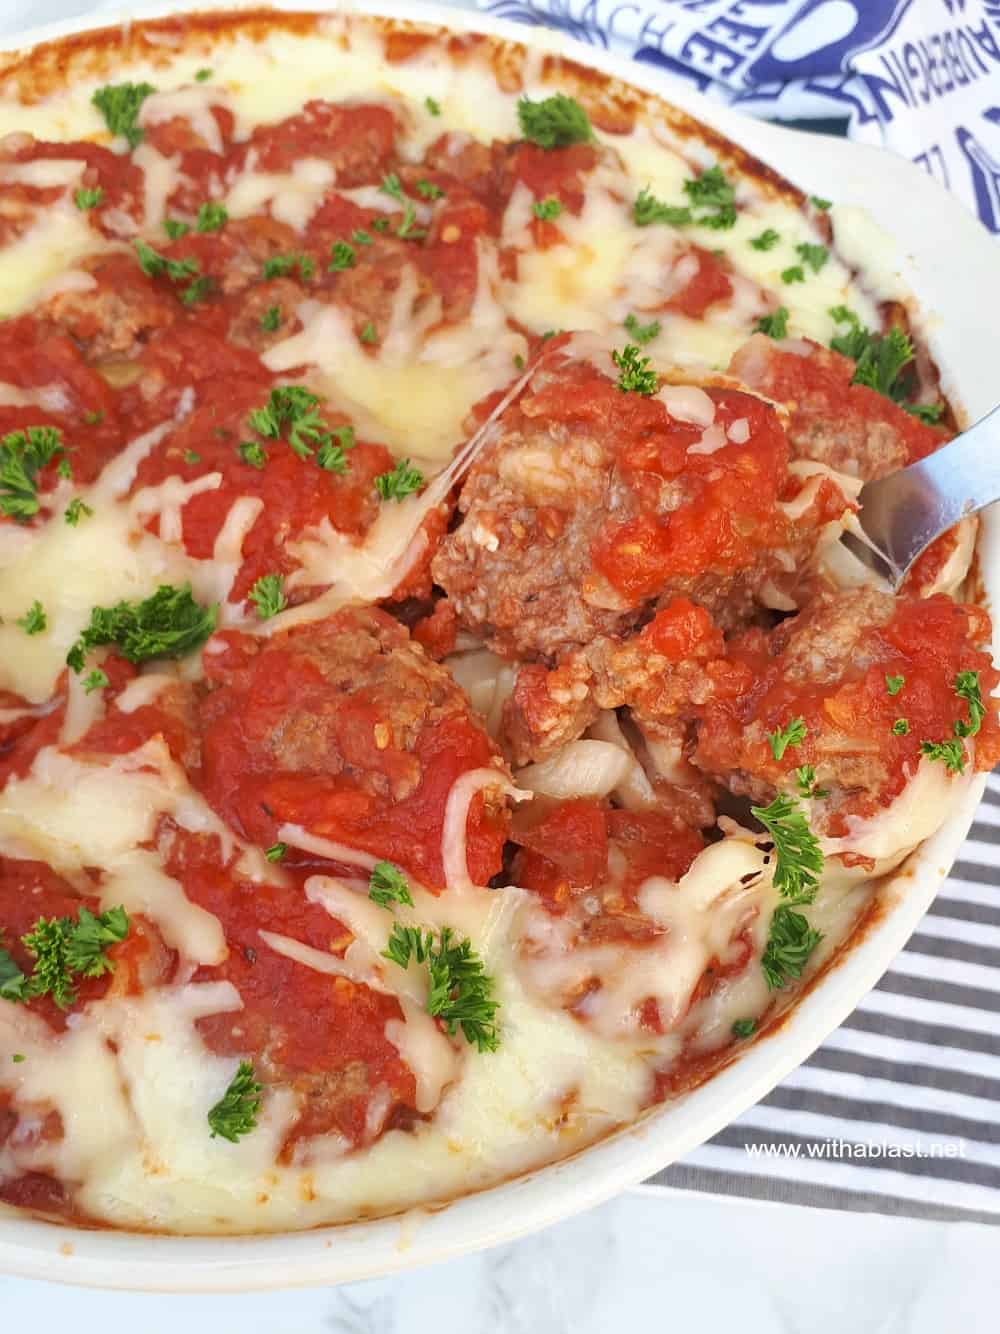 Pasta and Meatballs in Tomato Sauce 